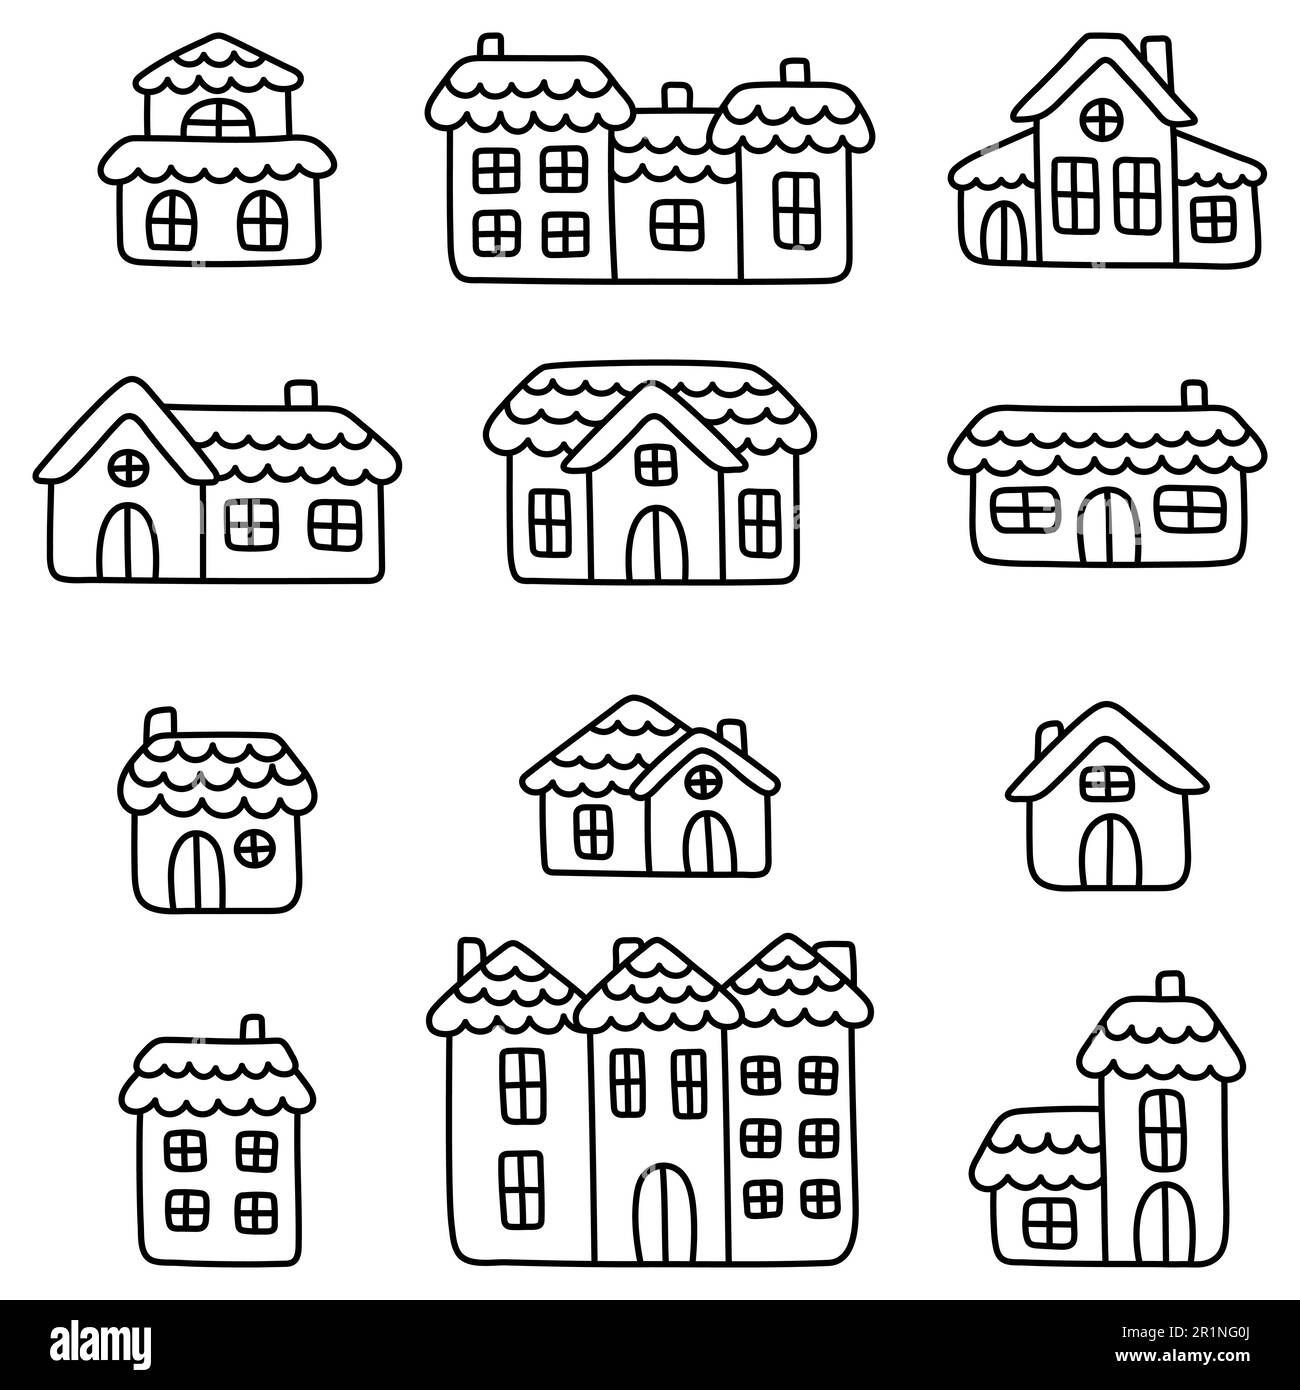 A collection of simple and cute linear houses. Doodle art illustration. Set of flat elements for the design of children's goods and clothes. Kawaii Stock Vector